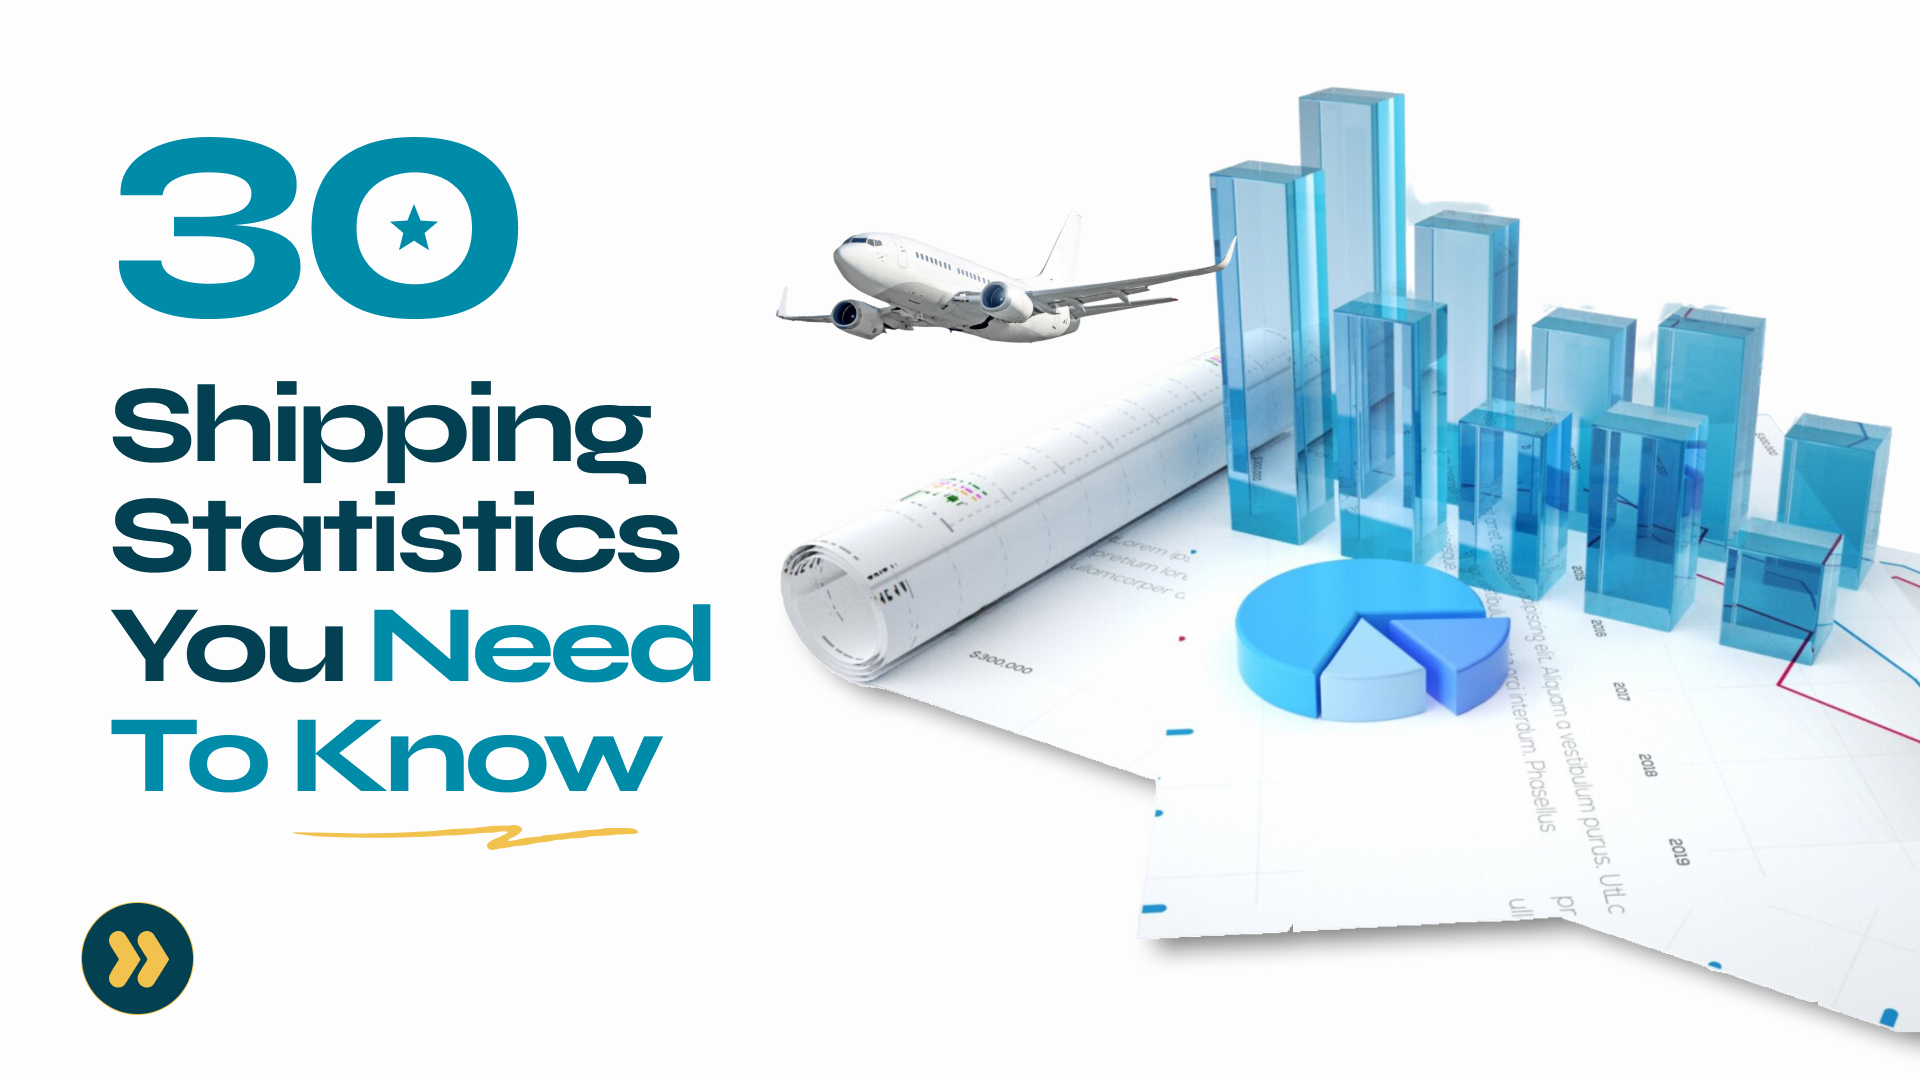 30 Shipping Statistics You Need To Know